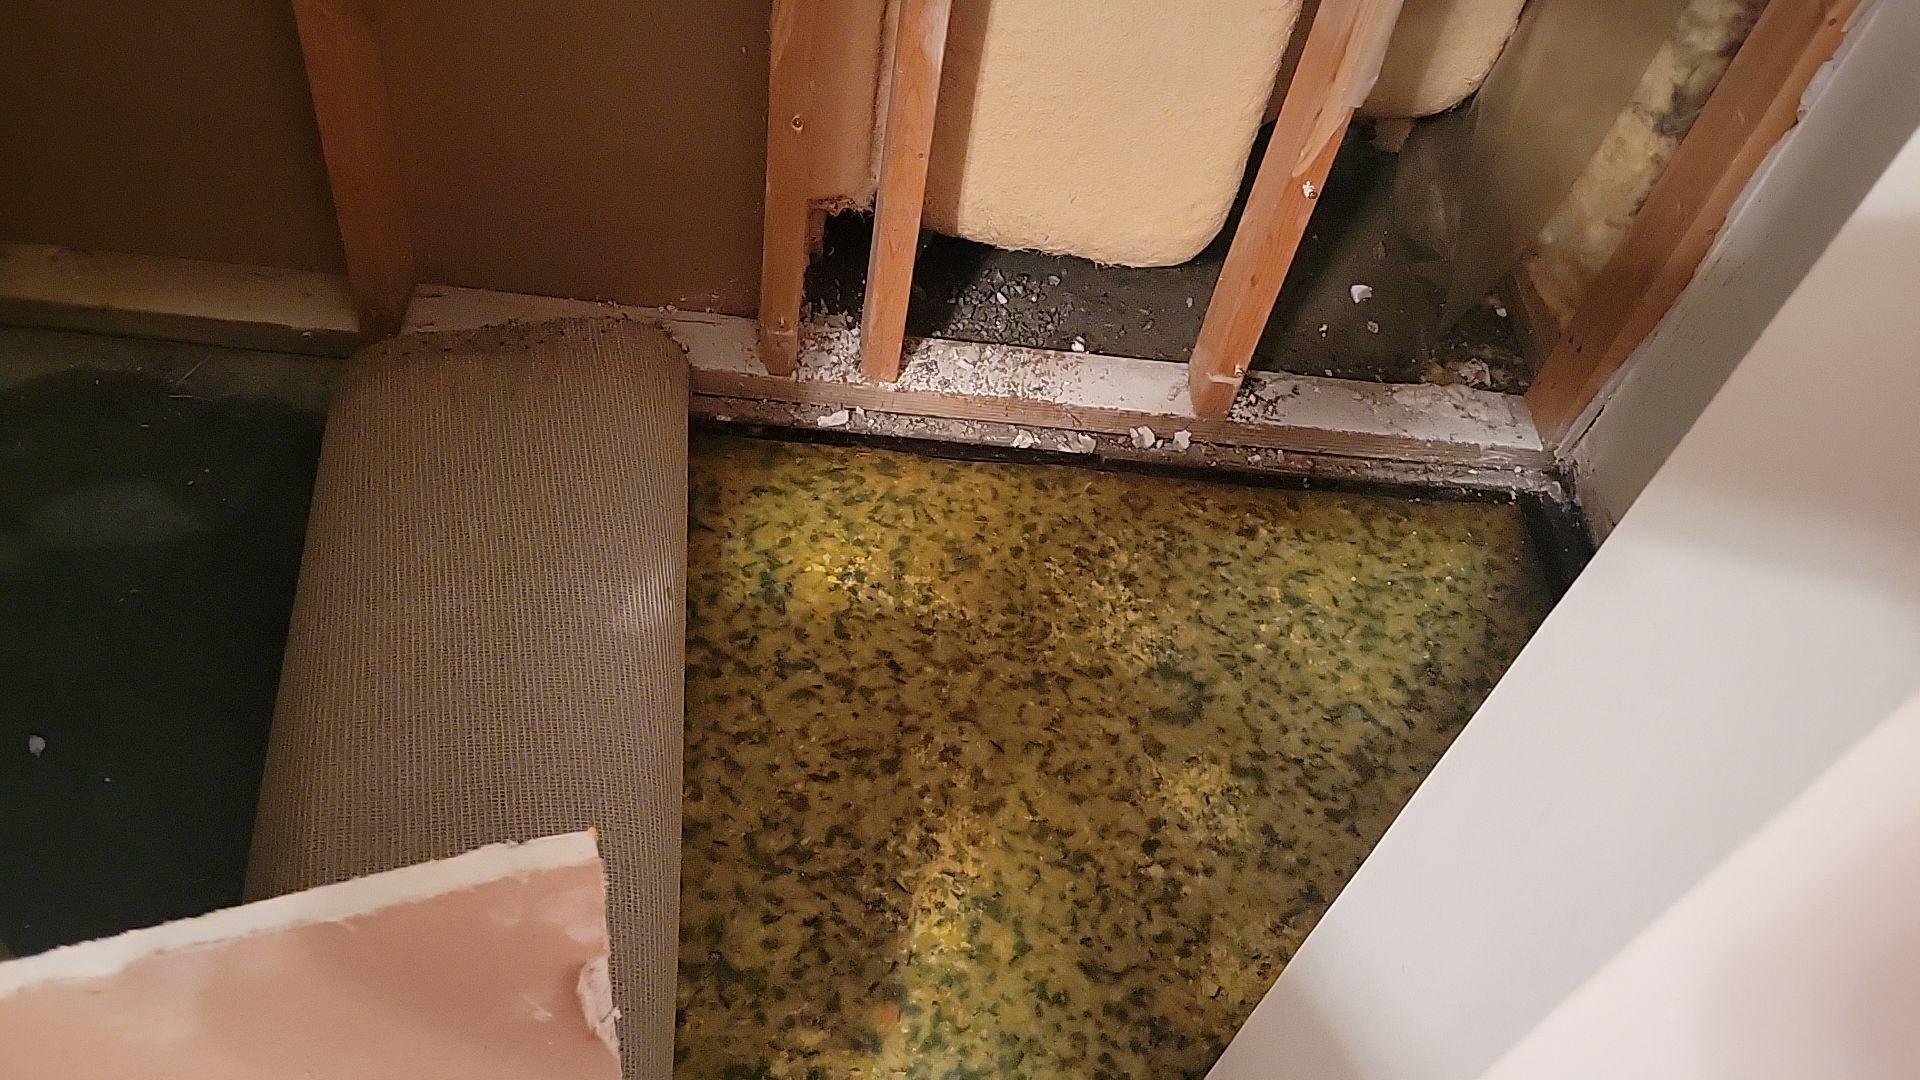 Removing the carpet, padding and drywall